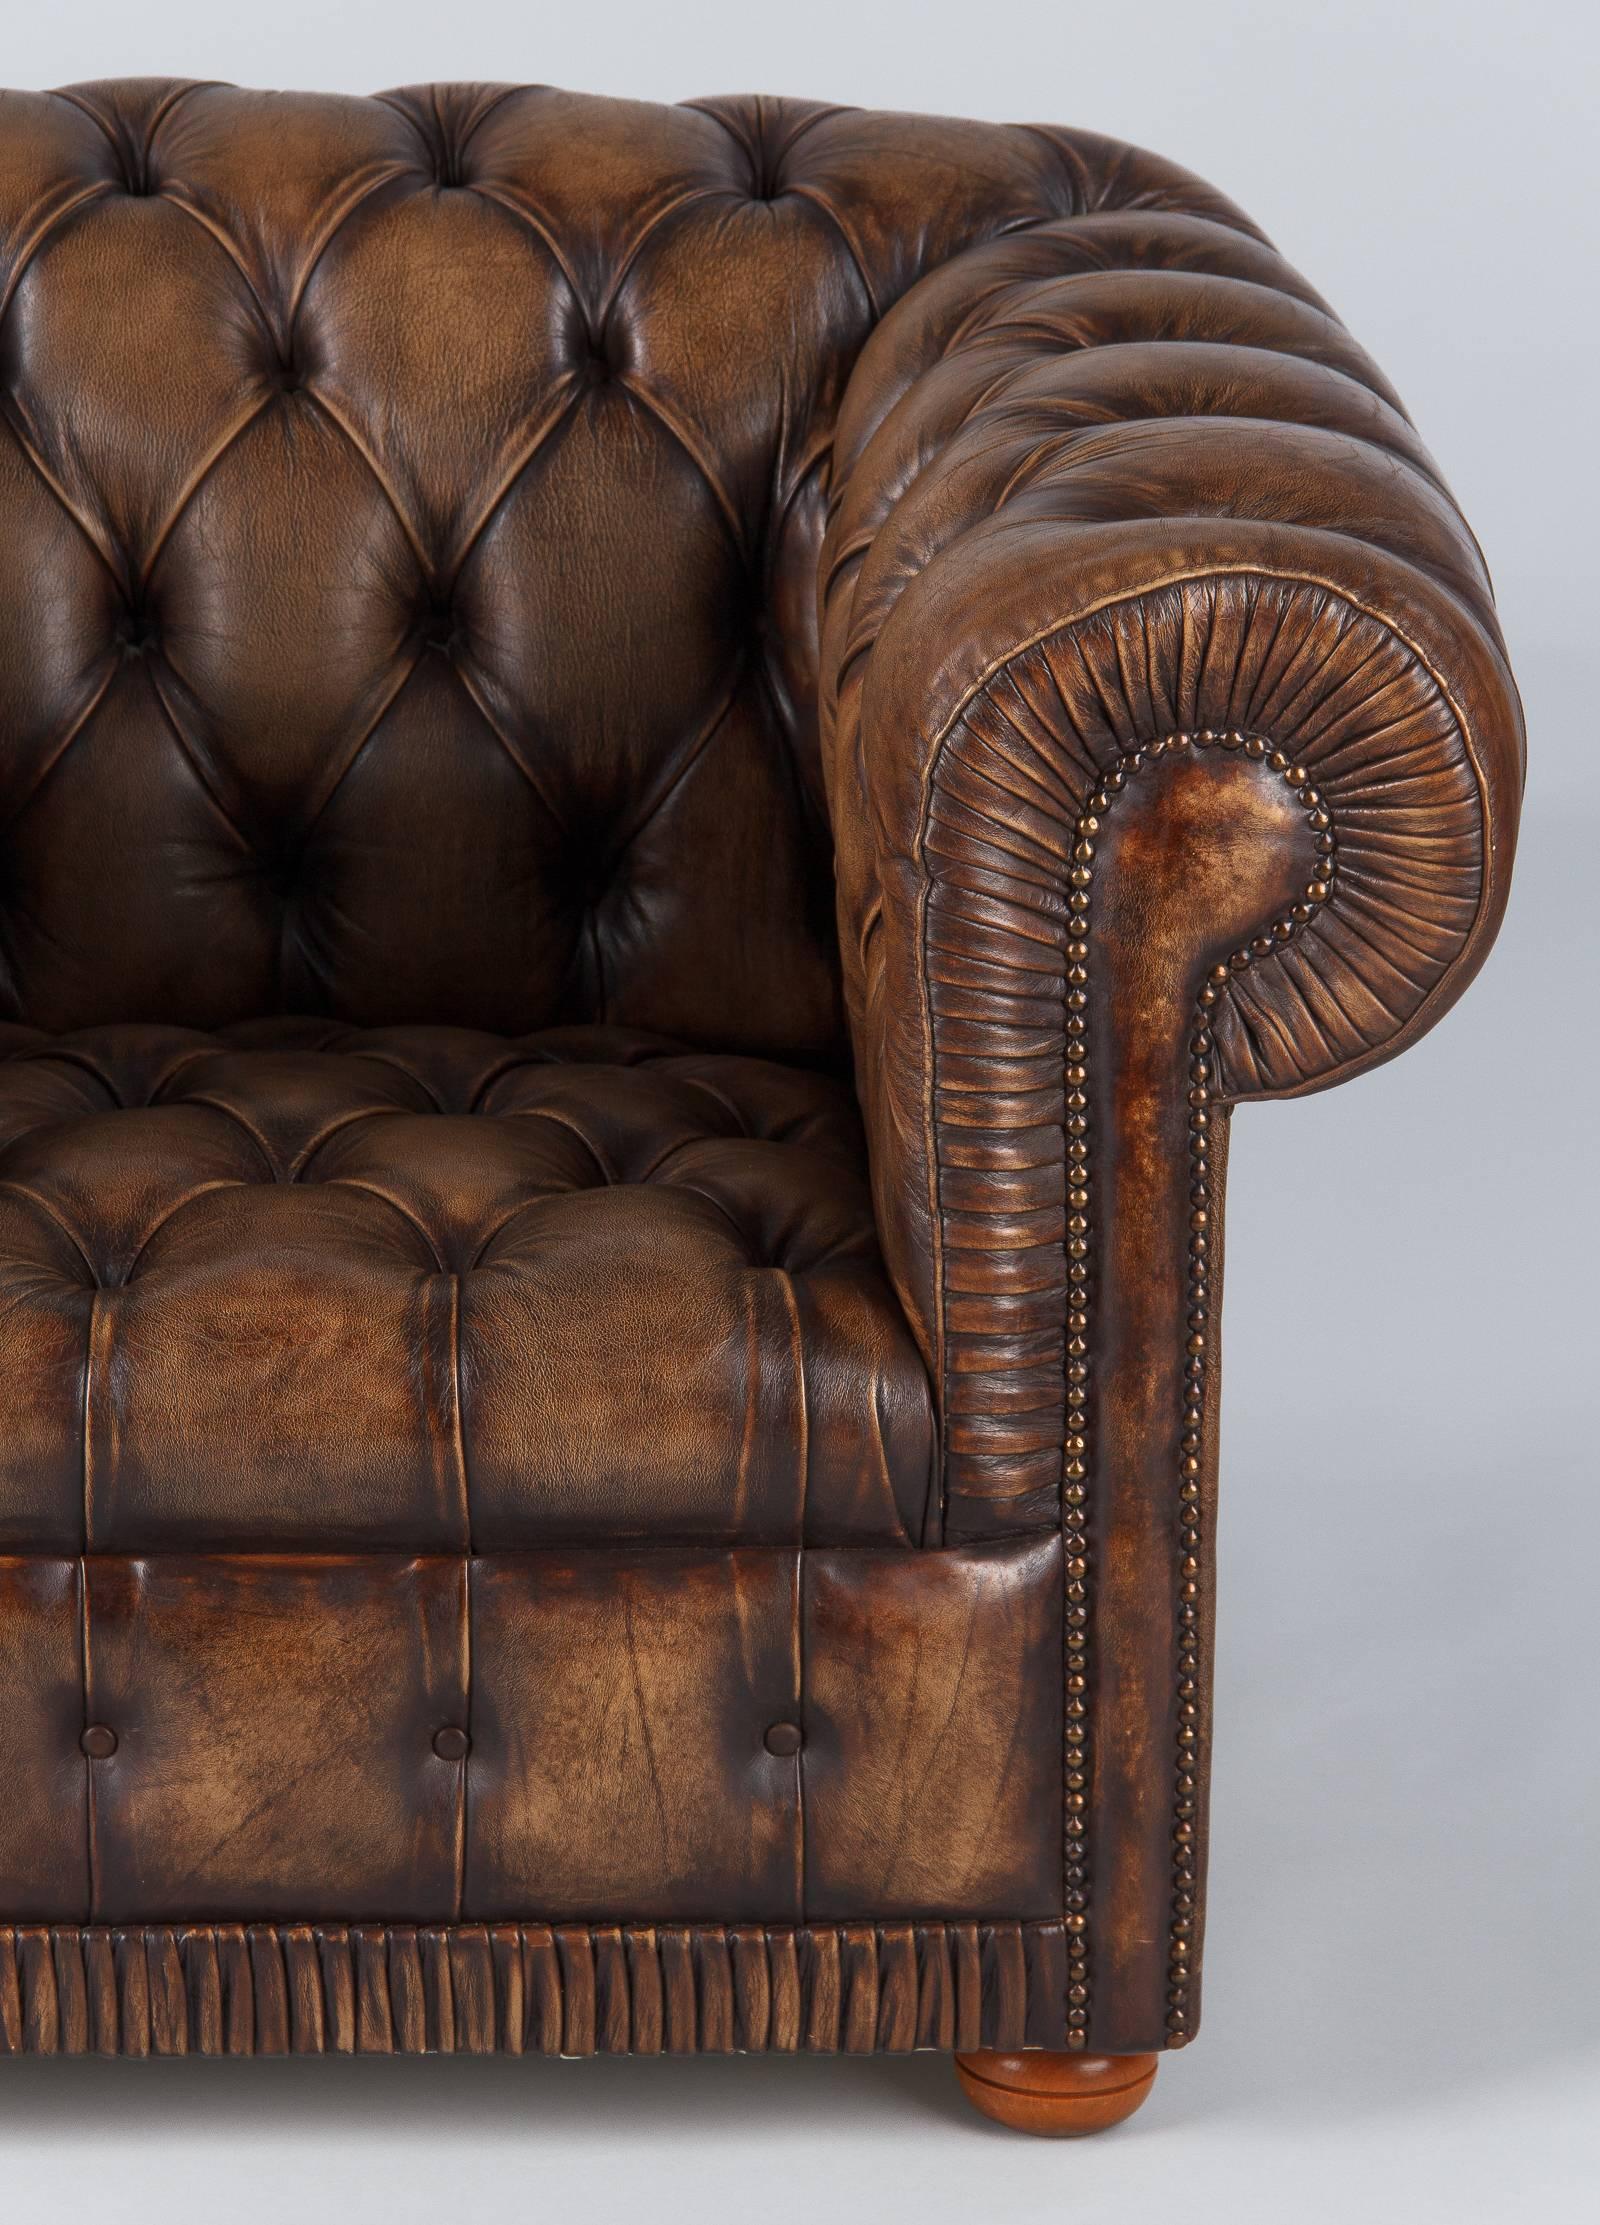 Great Britain (UK) Vintage English Chesterfield Armchair in Brown Leather, 1960s